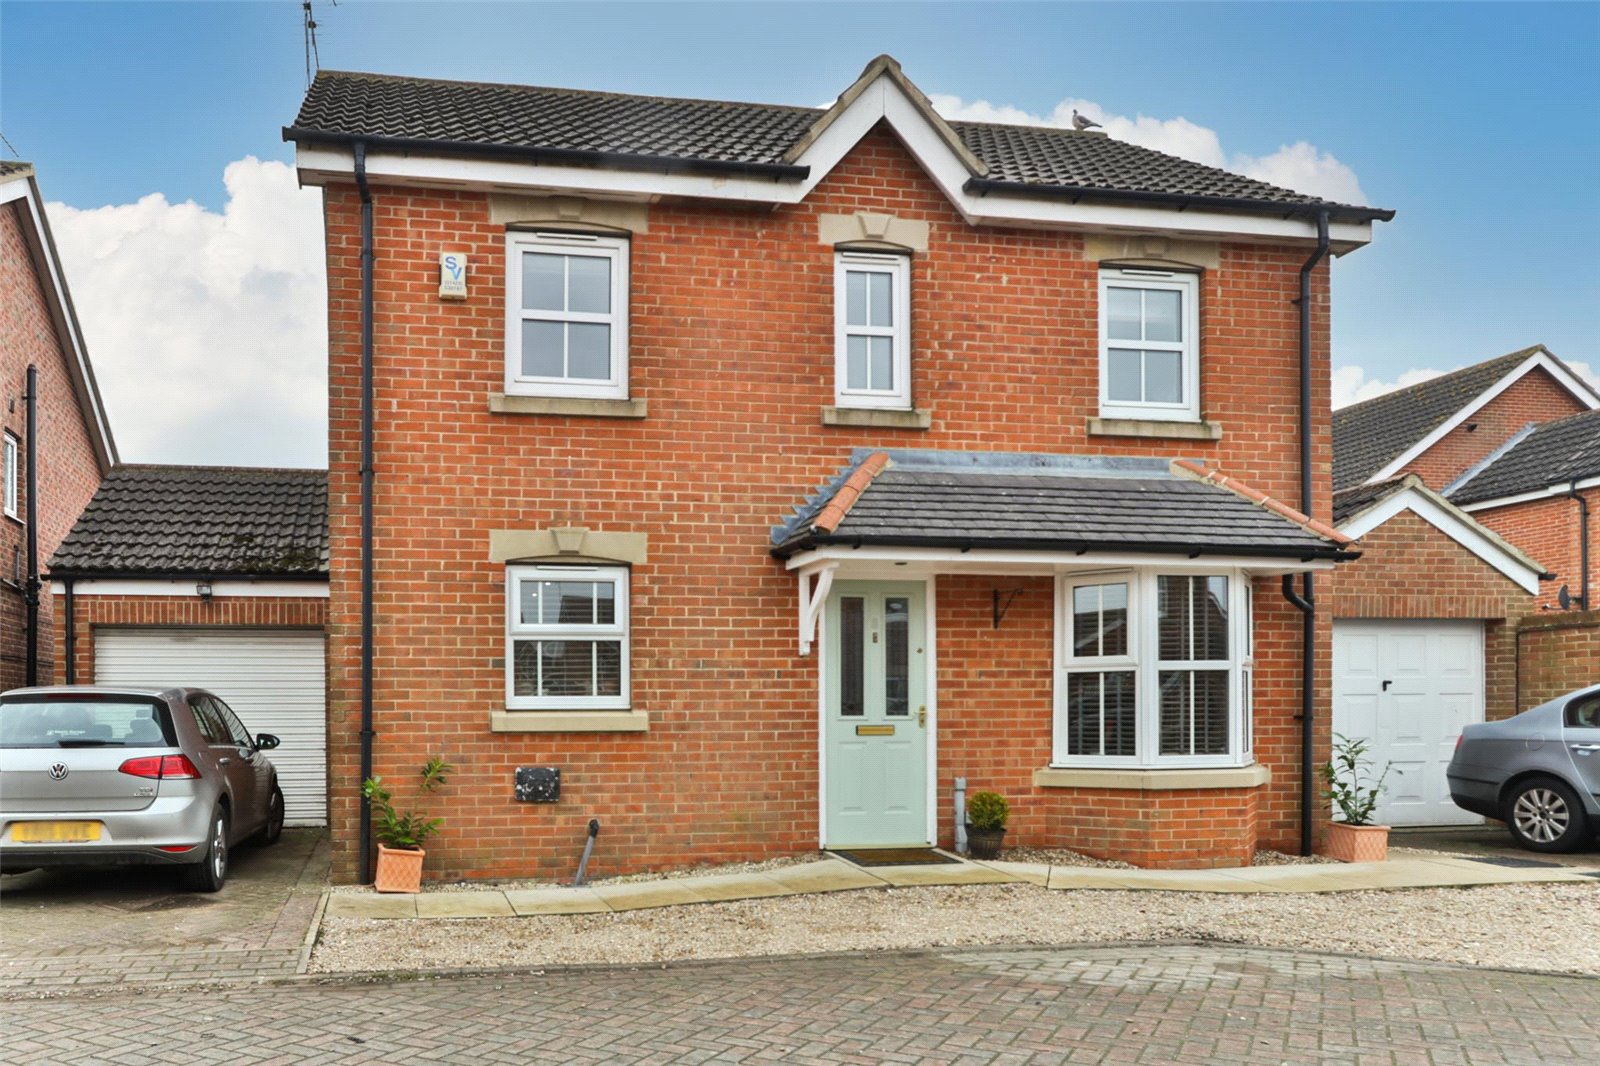 4 bed house for sale in Appletree Close, Long Riston, HU11